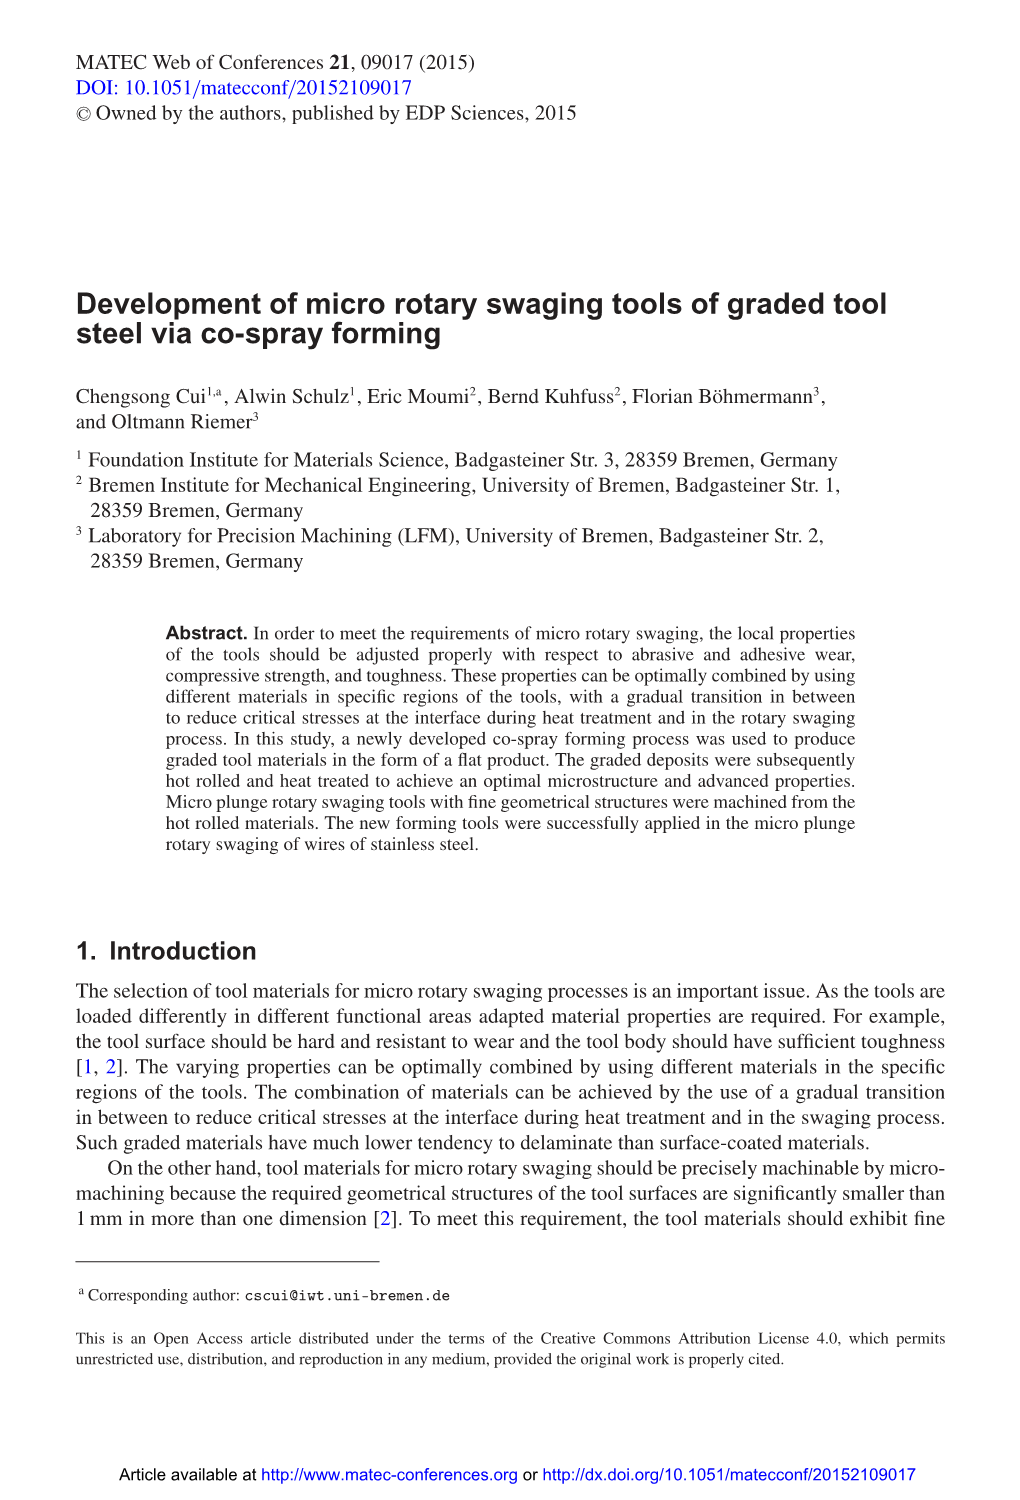 Development of Micro Rotary Swaging Tools of Graded Tool Steel Via Co-Spray Forming